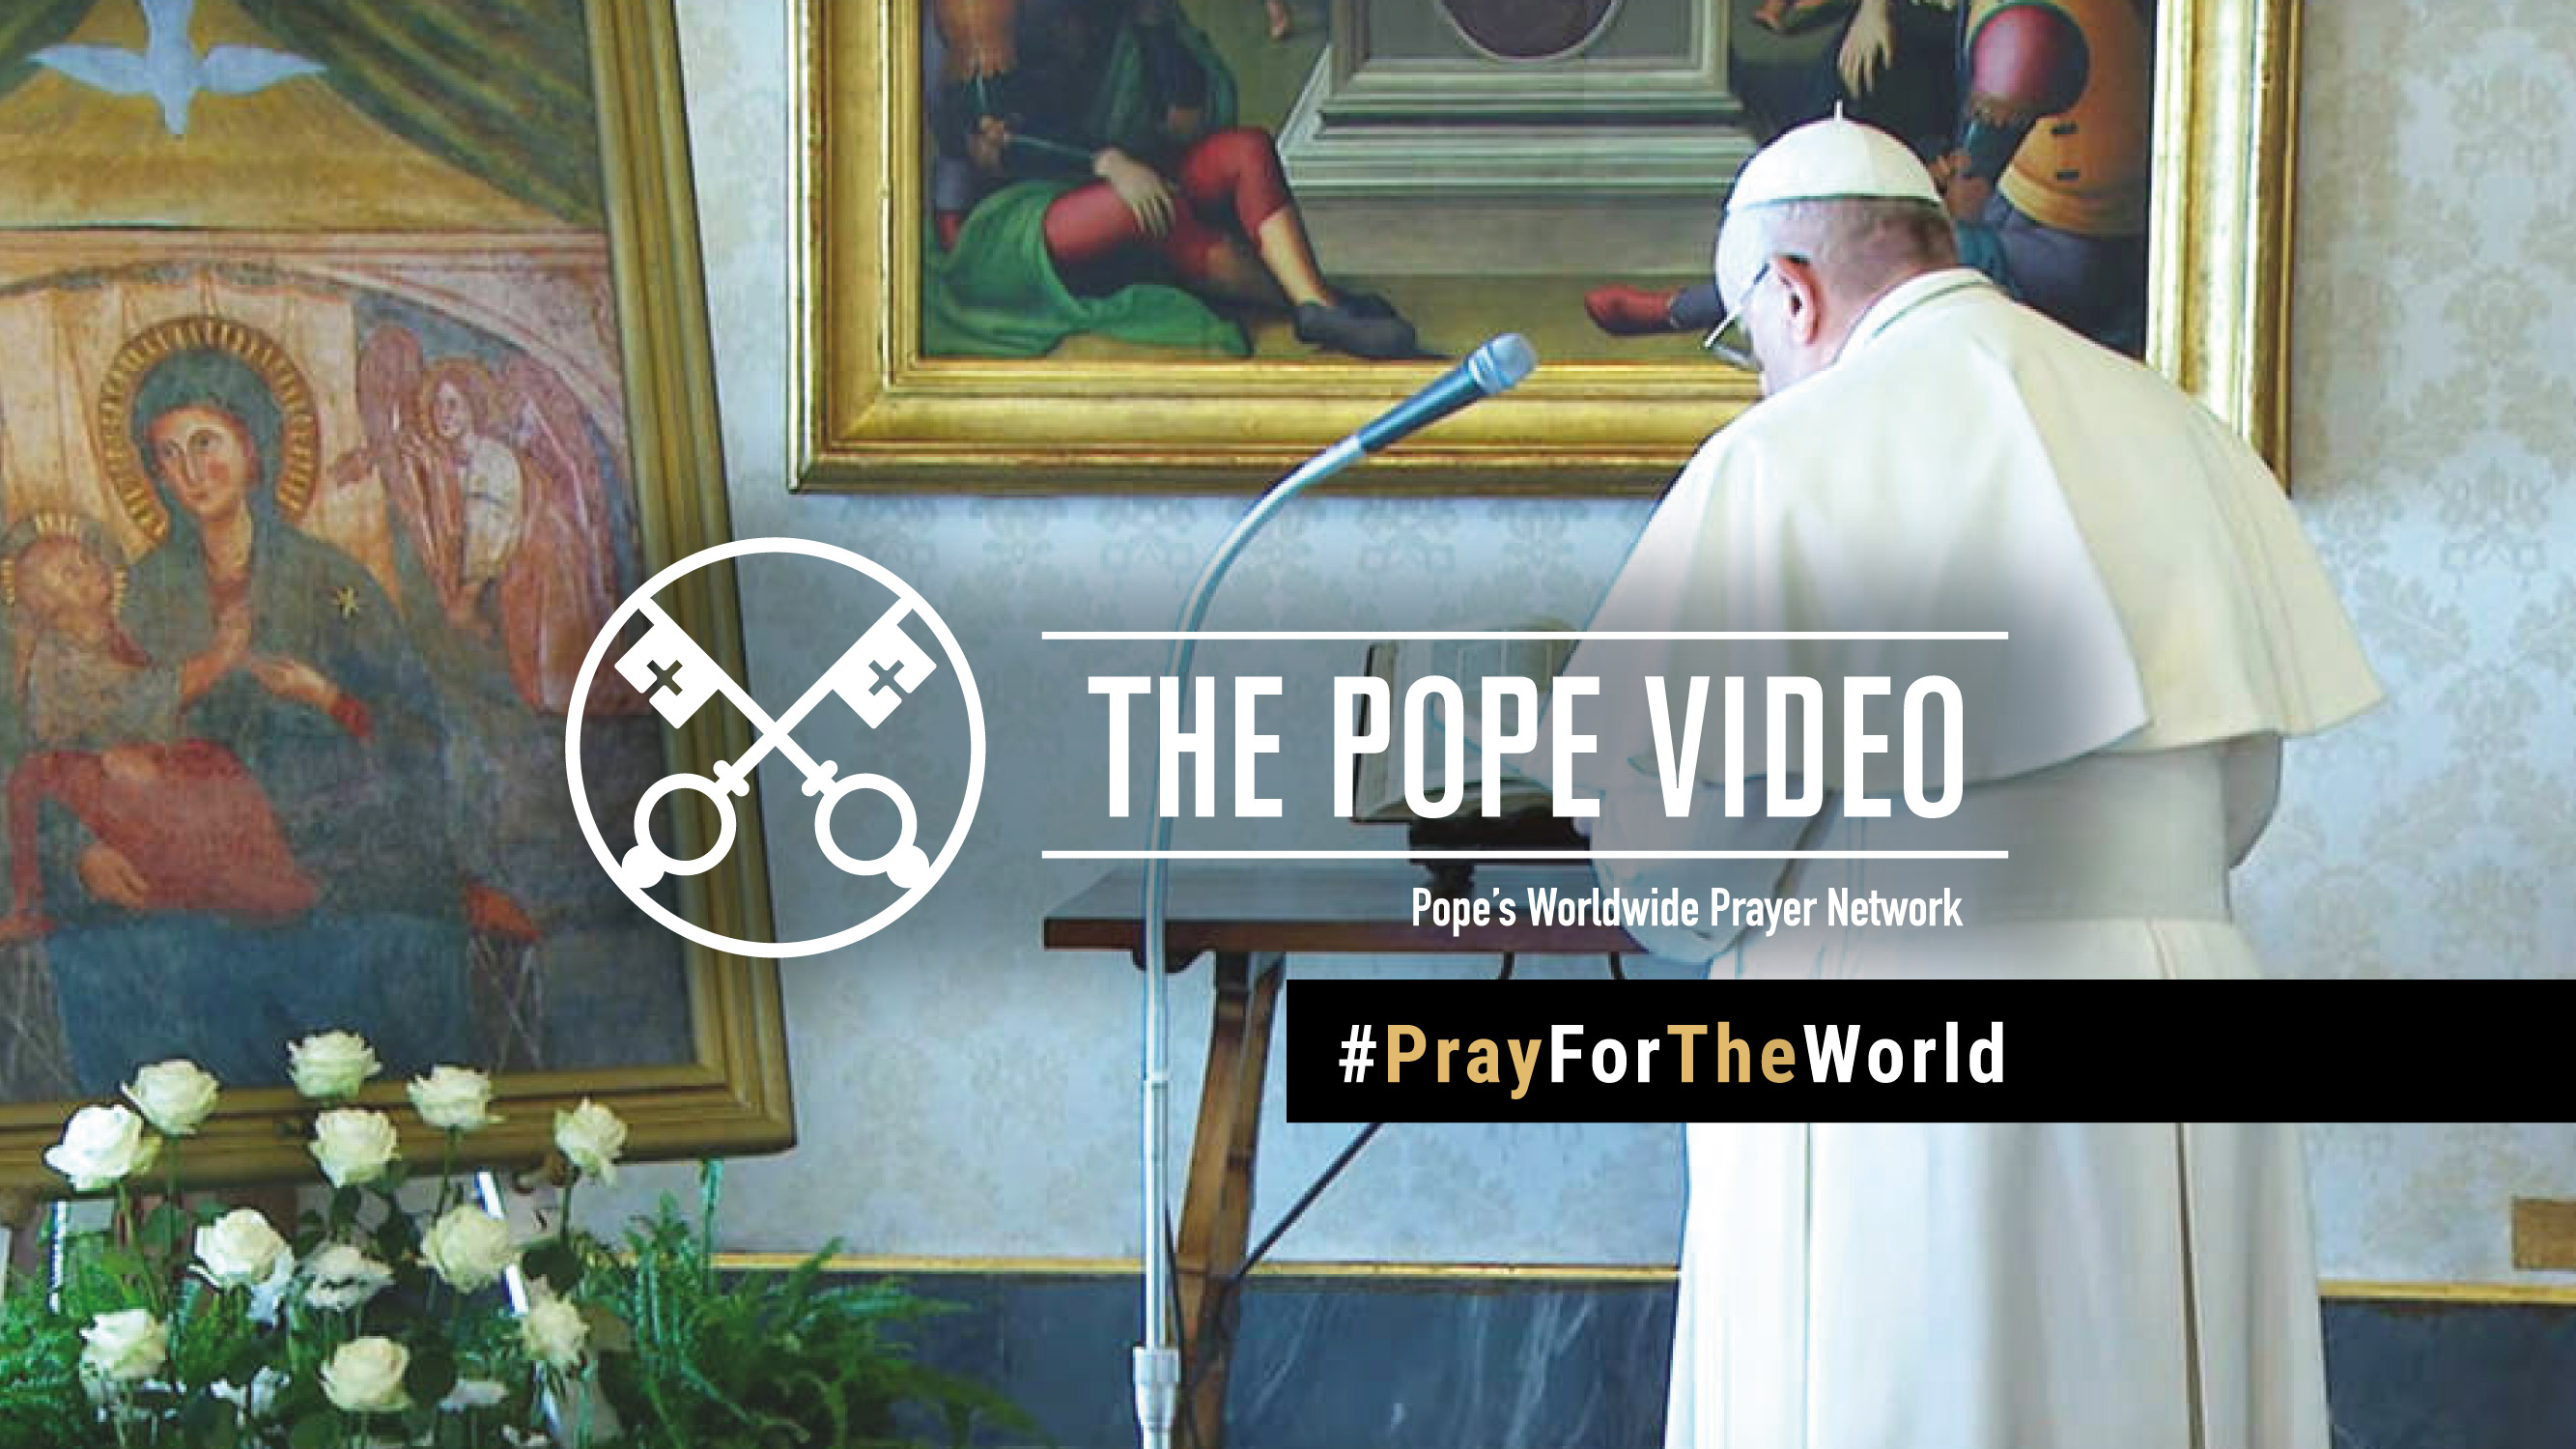 (Official Image) The Pope Video 2020 #PrayForTheWorld